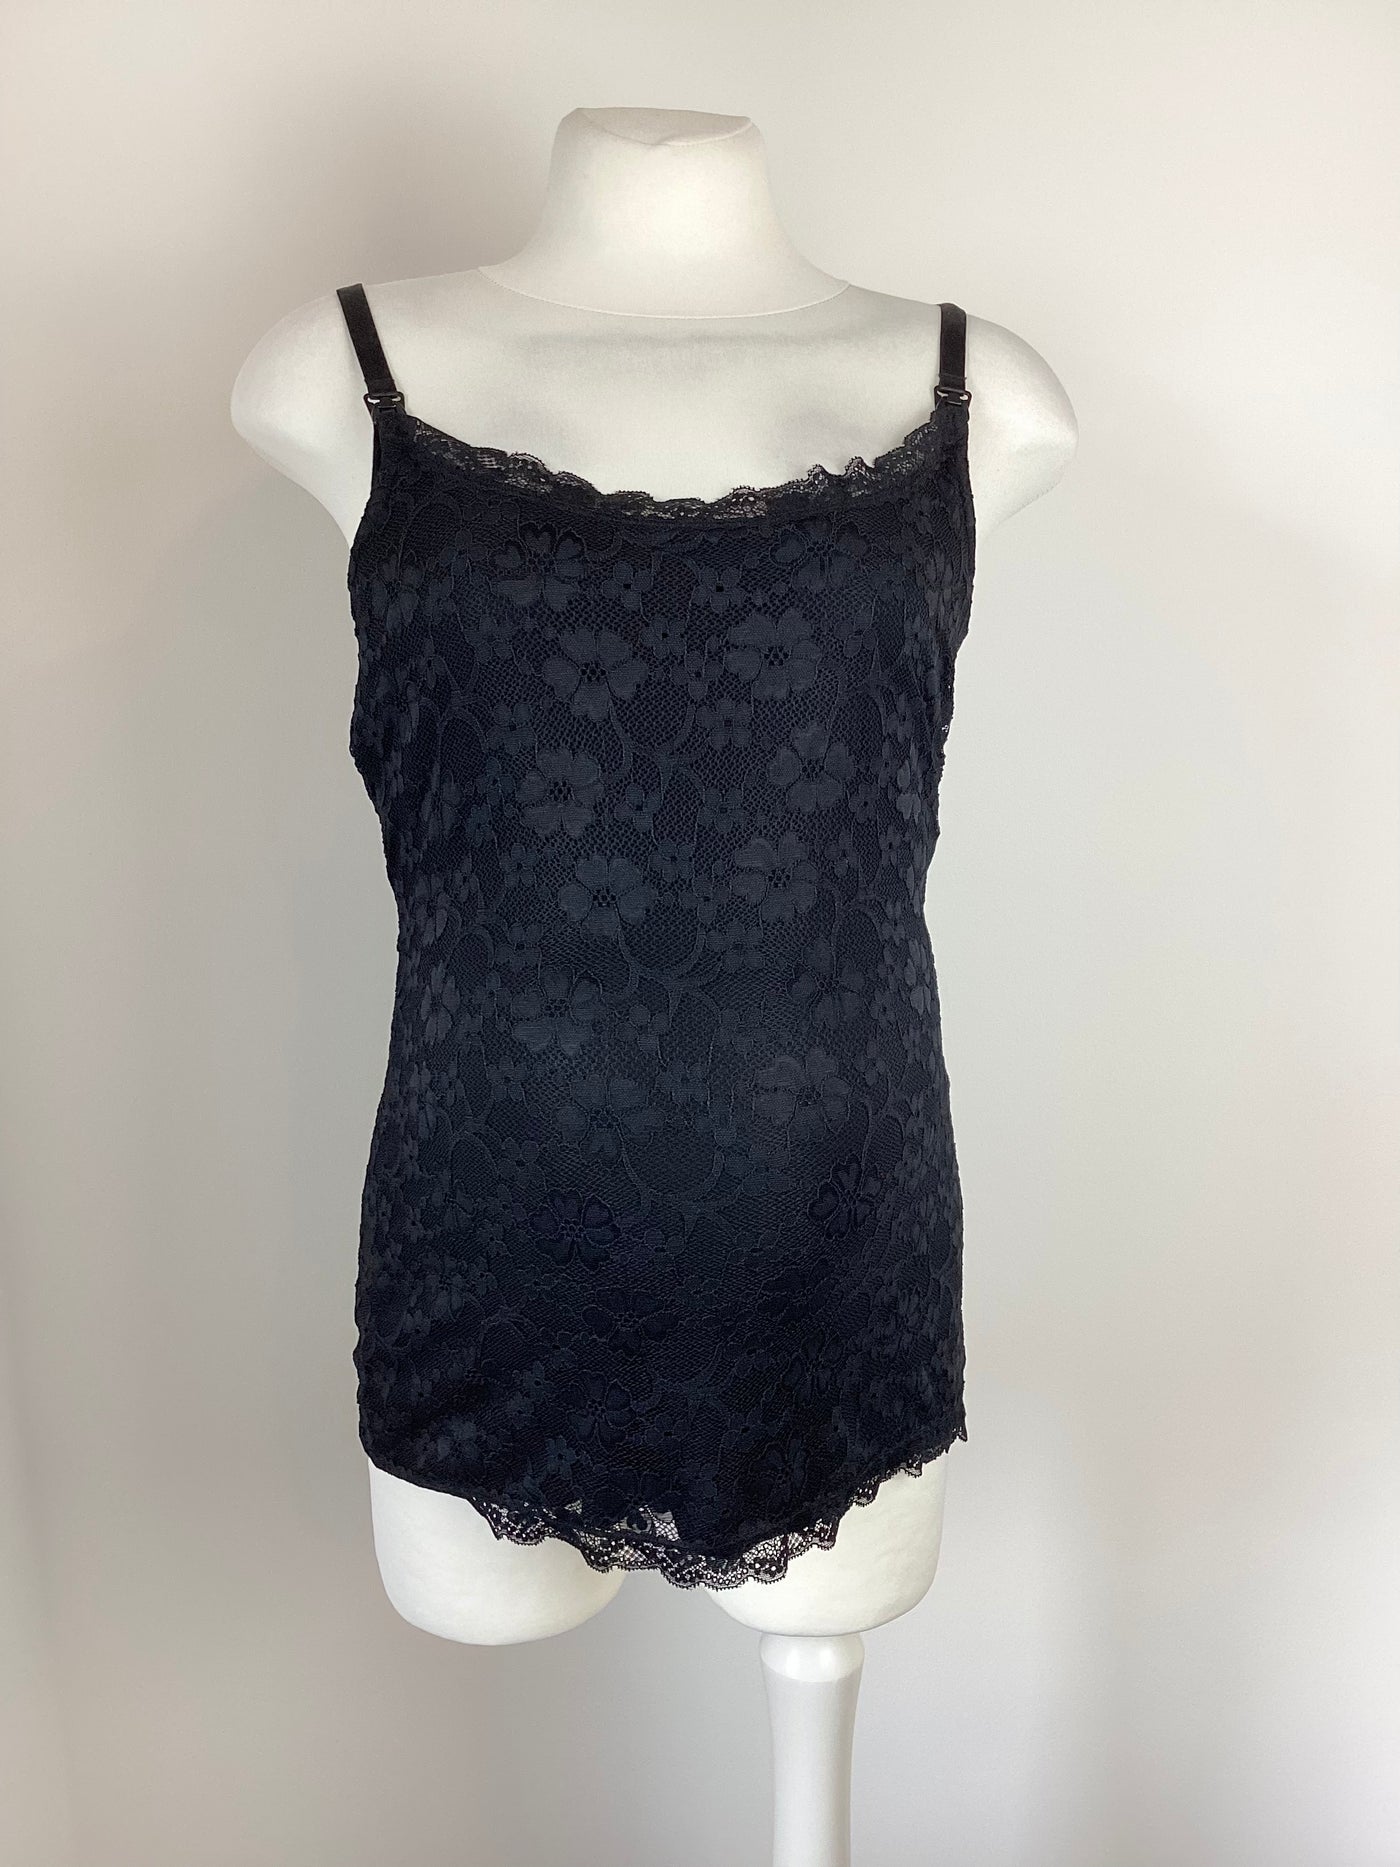 H&M Mama black lace camisole nursing top (BNWT) - Size M (Approx UK 10/12)